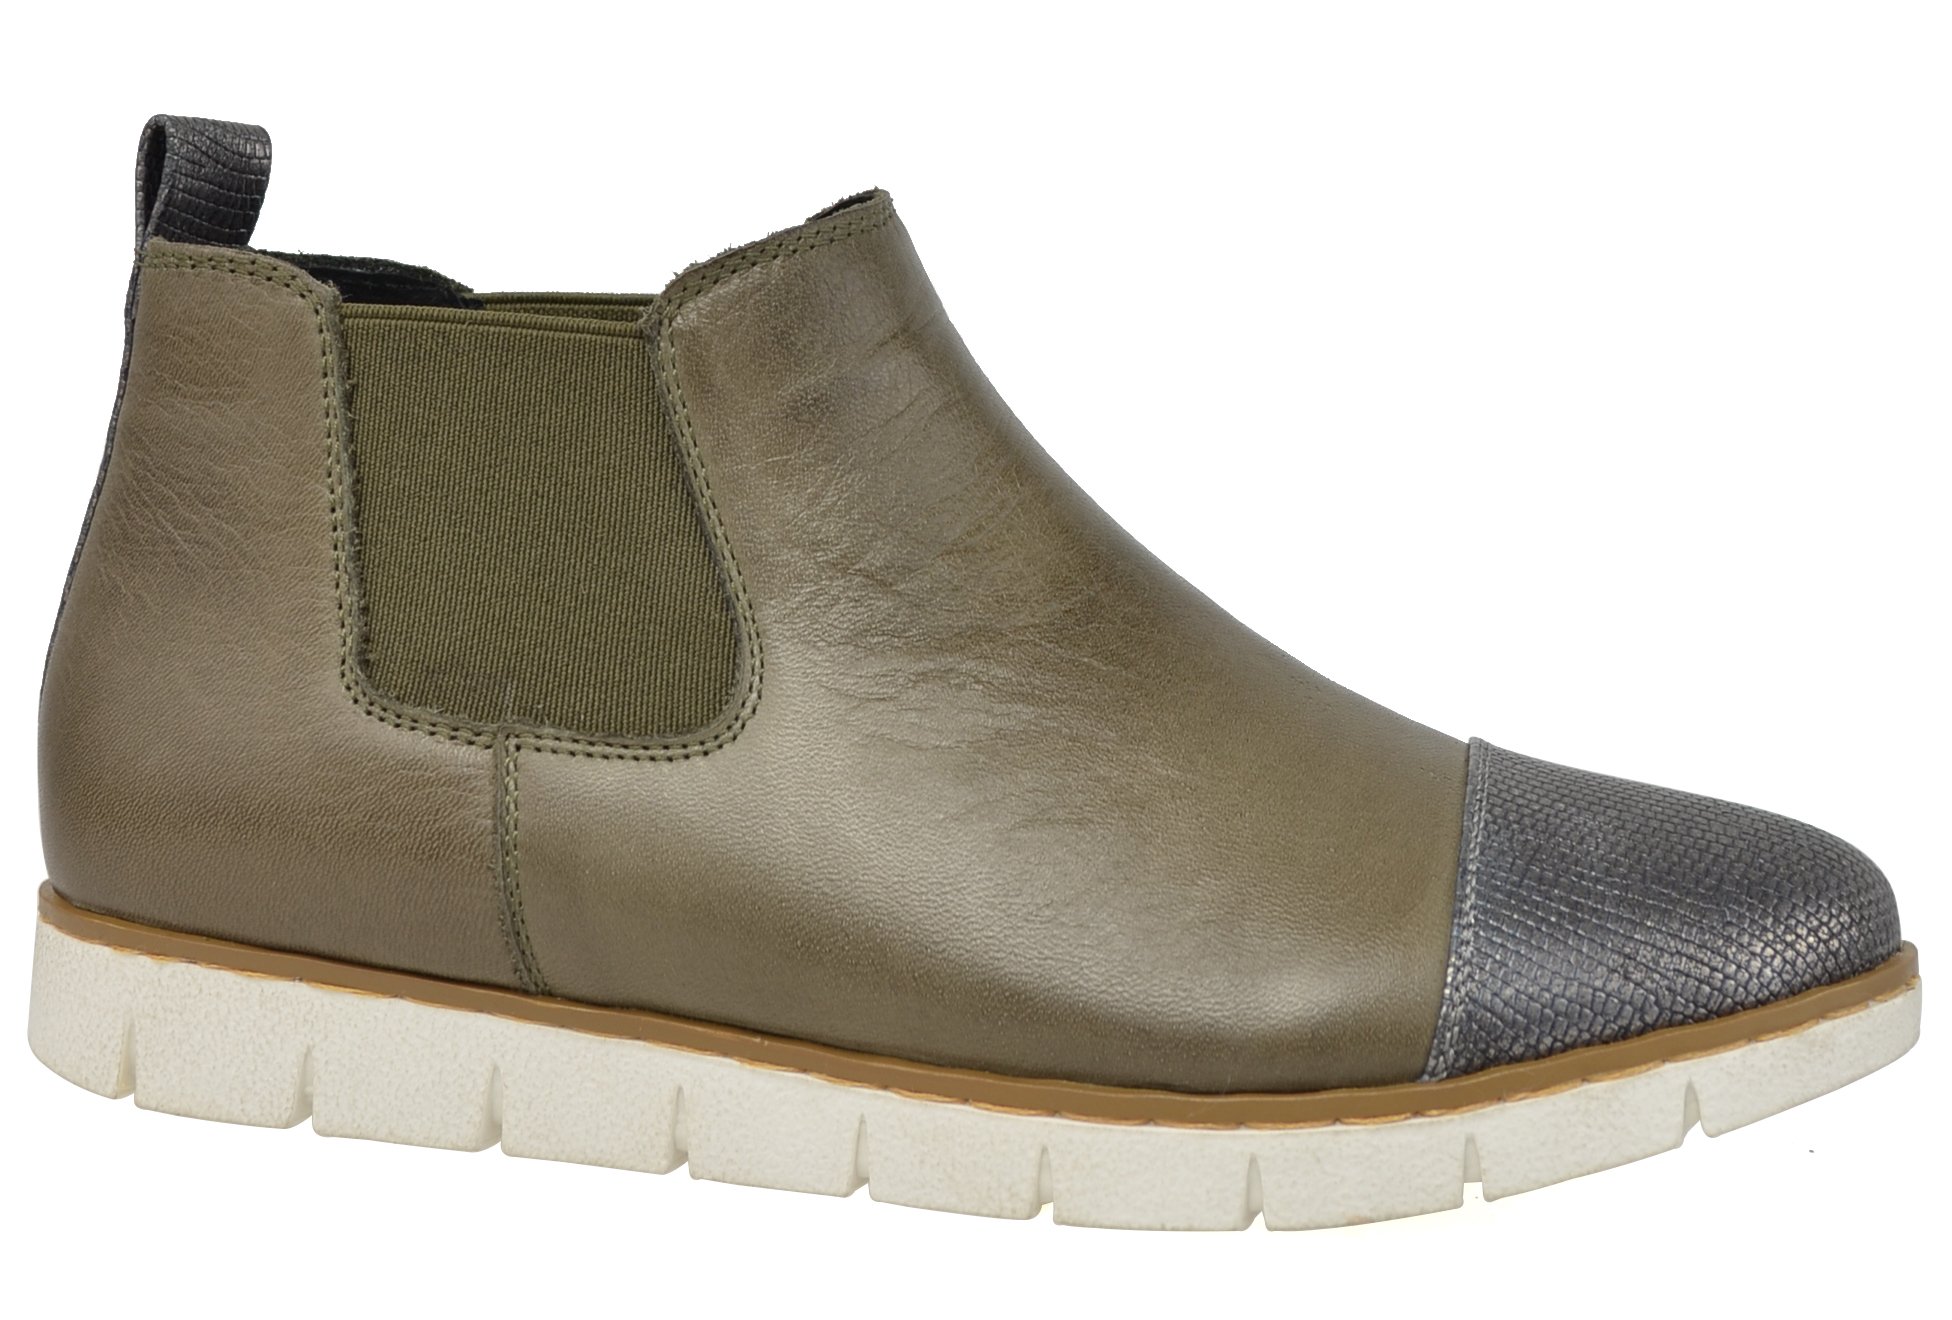 MARSDEN-OLIVE LEATHER - Traffic Footwear Women Shoes Collection ...